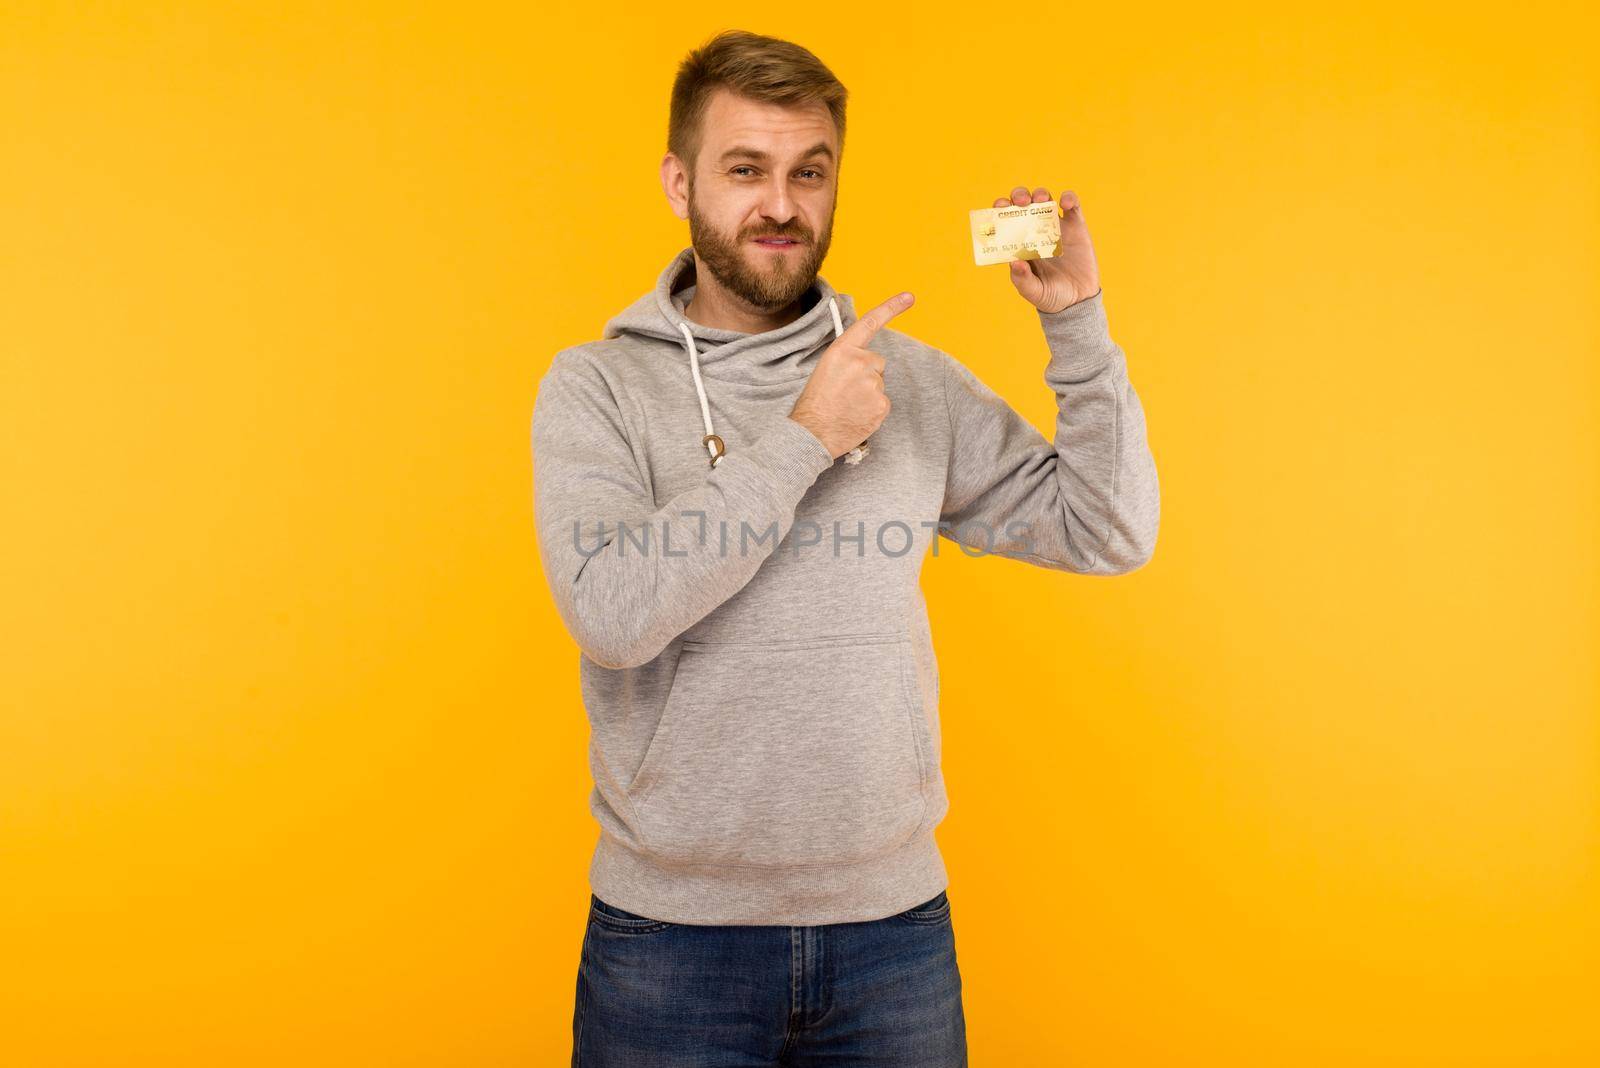 Attractive man in a gray hoodie points a finger at the credit card that is holding in his hand on a yellow background by zartarn